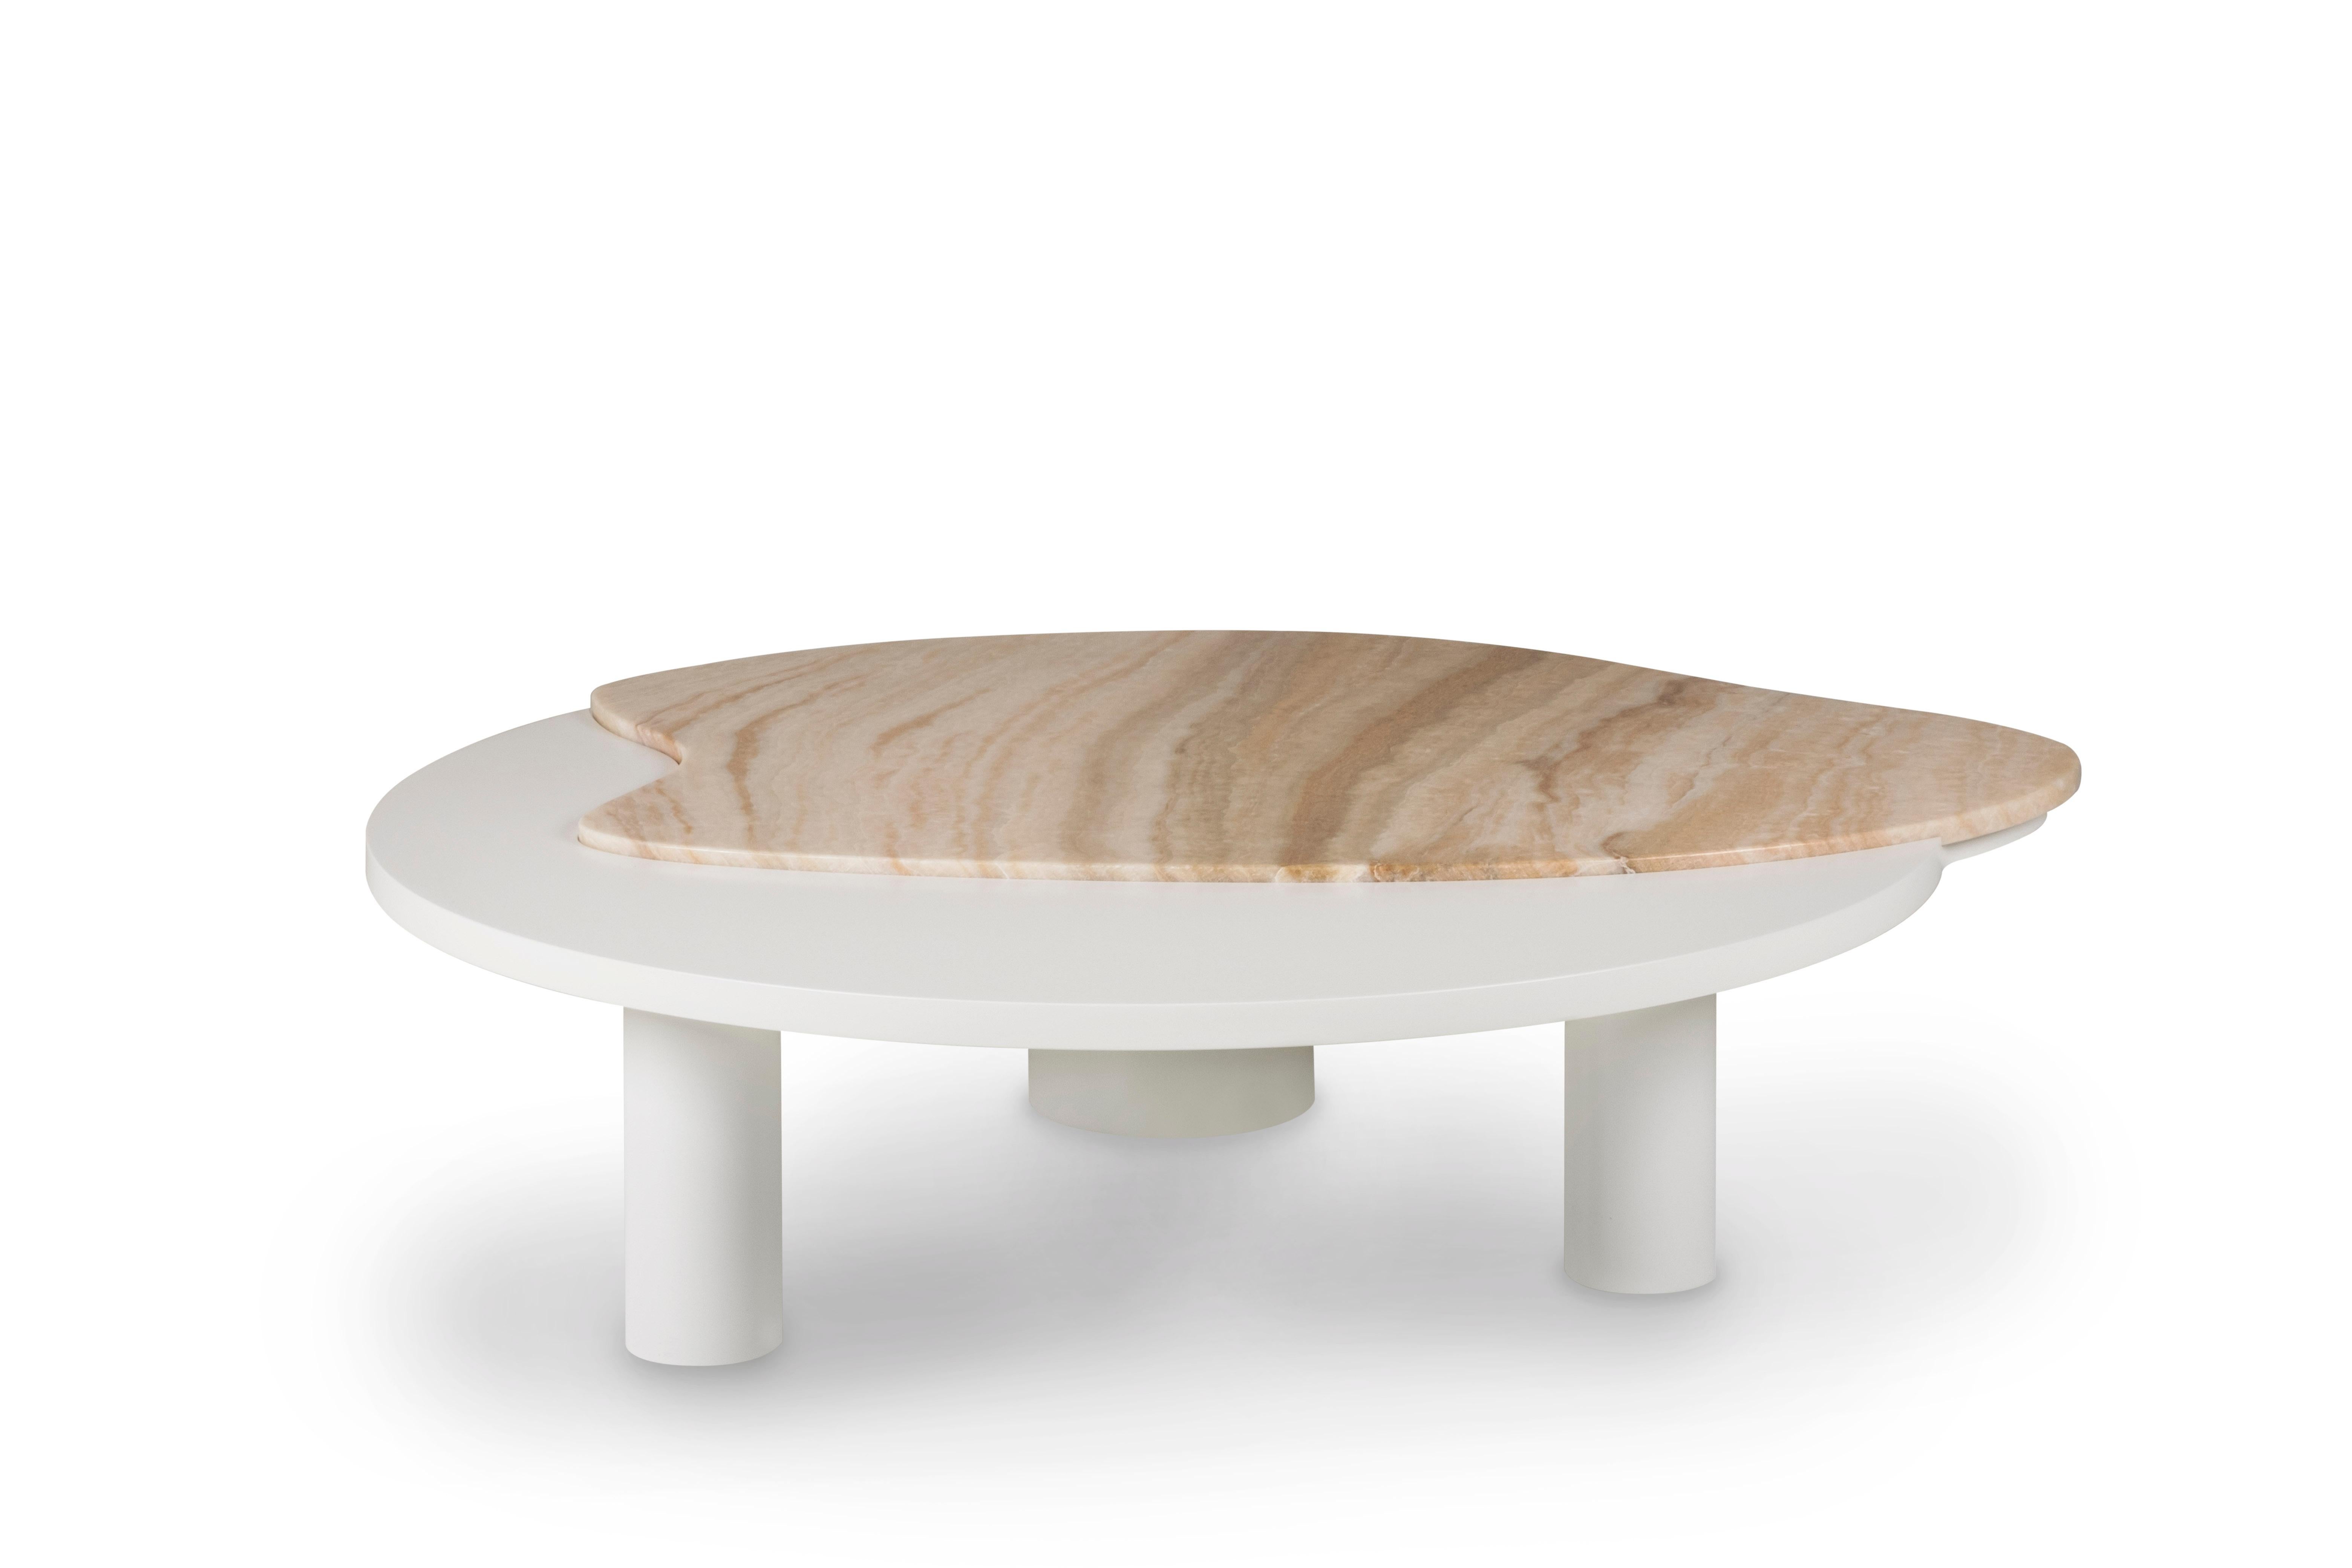 Bodeira Coffee Table, Contemporary Collection, Handcrafted in Portugal - Europe by Greenapple.

Designed by Rute Martins for the Contemporary Collection and inspired by the lines of the beautiful Bordeira beach, this low table adds a representation